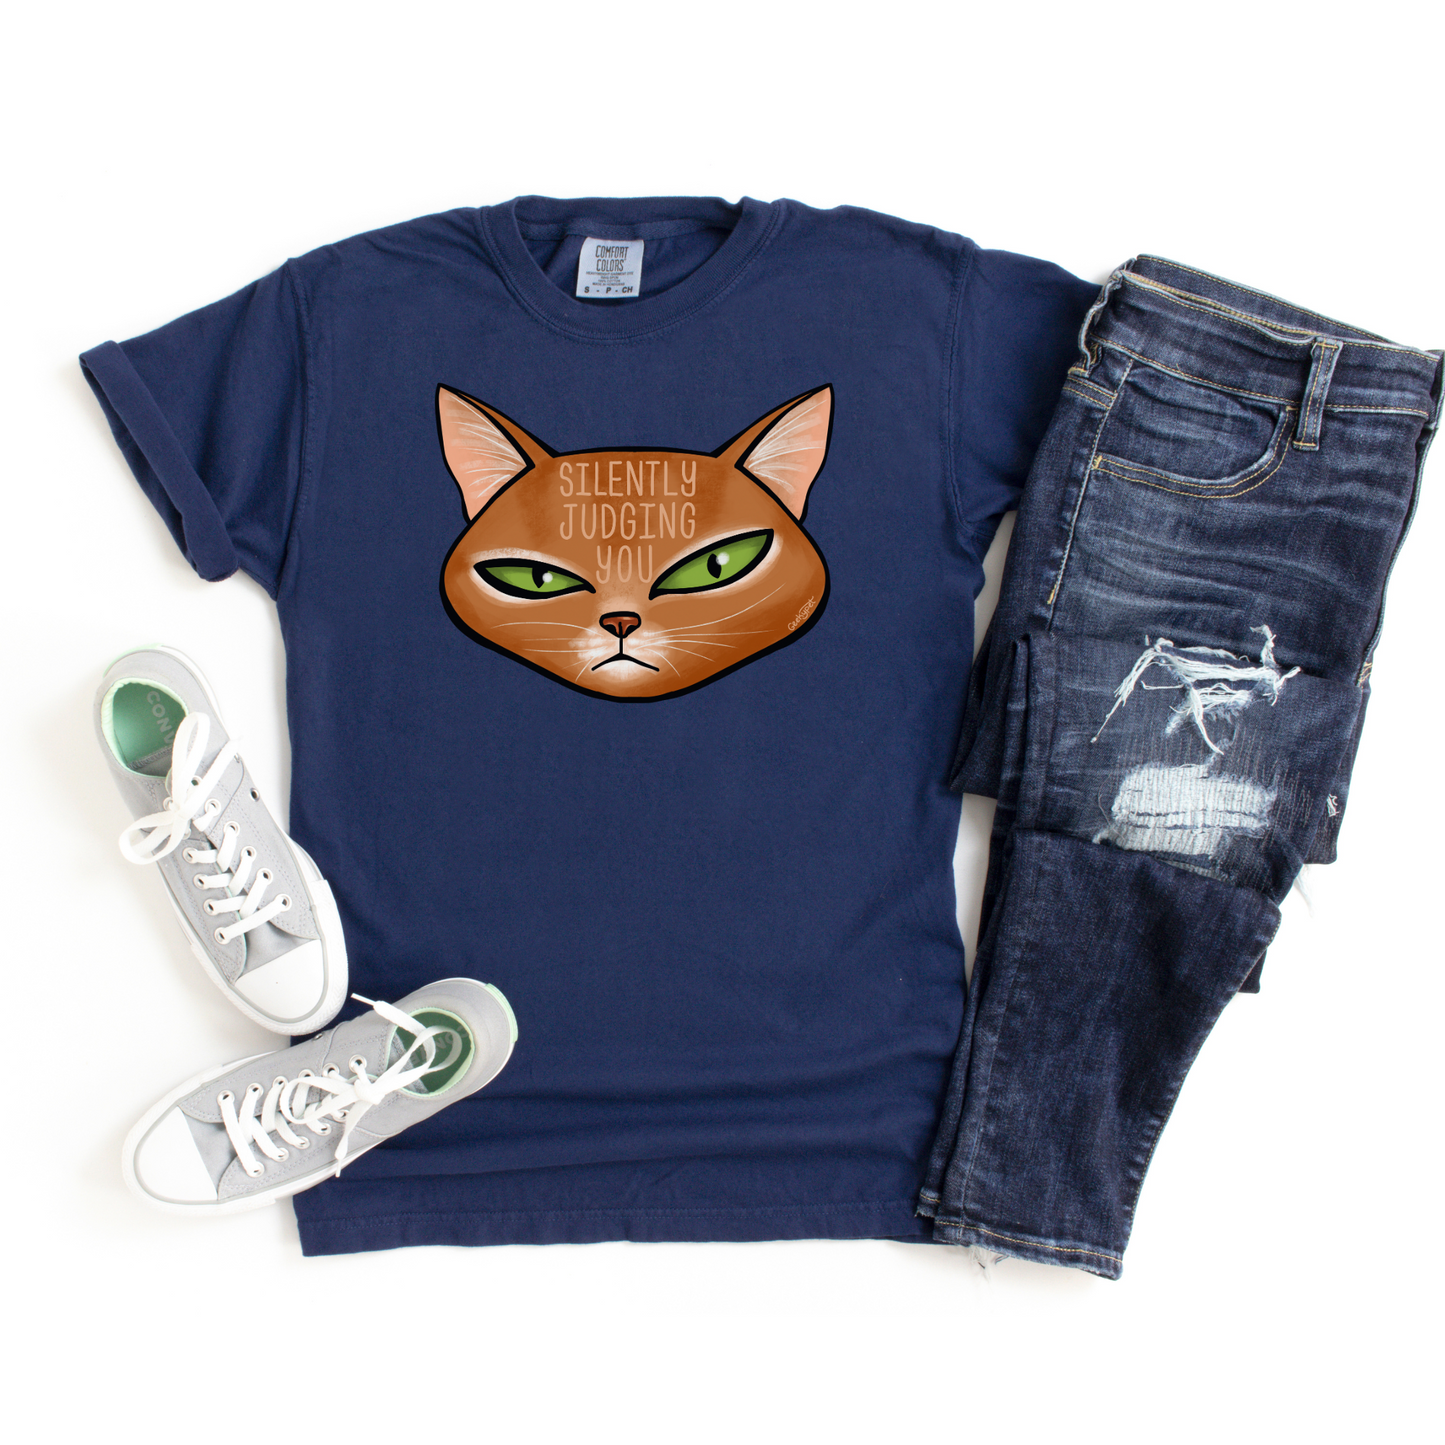 Geeky Pets t-shirt | Silently Judging you t-shirt  | Adult t-shirt | Unisex Comfort Color t-shirts